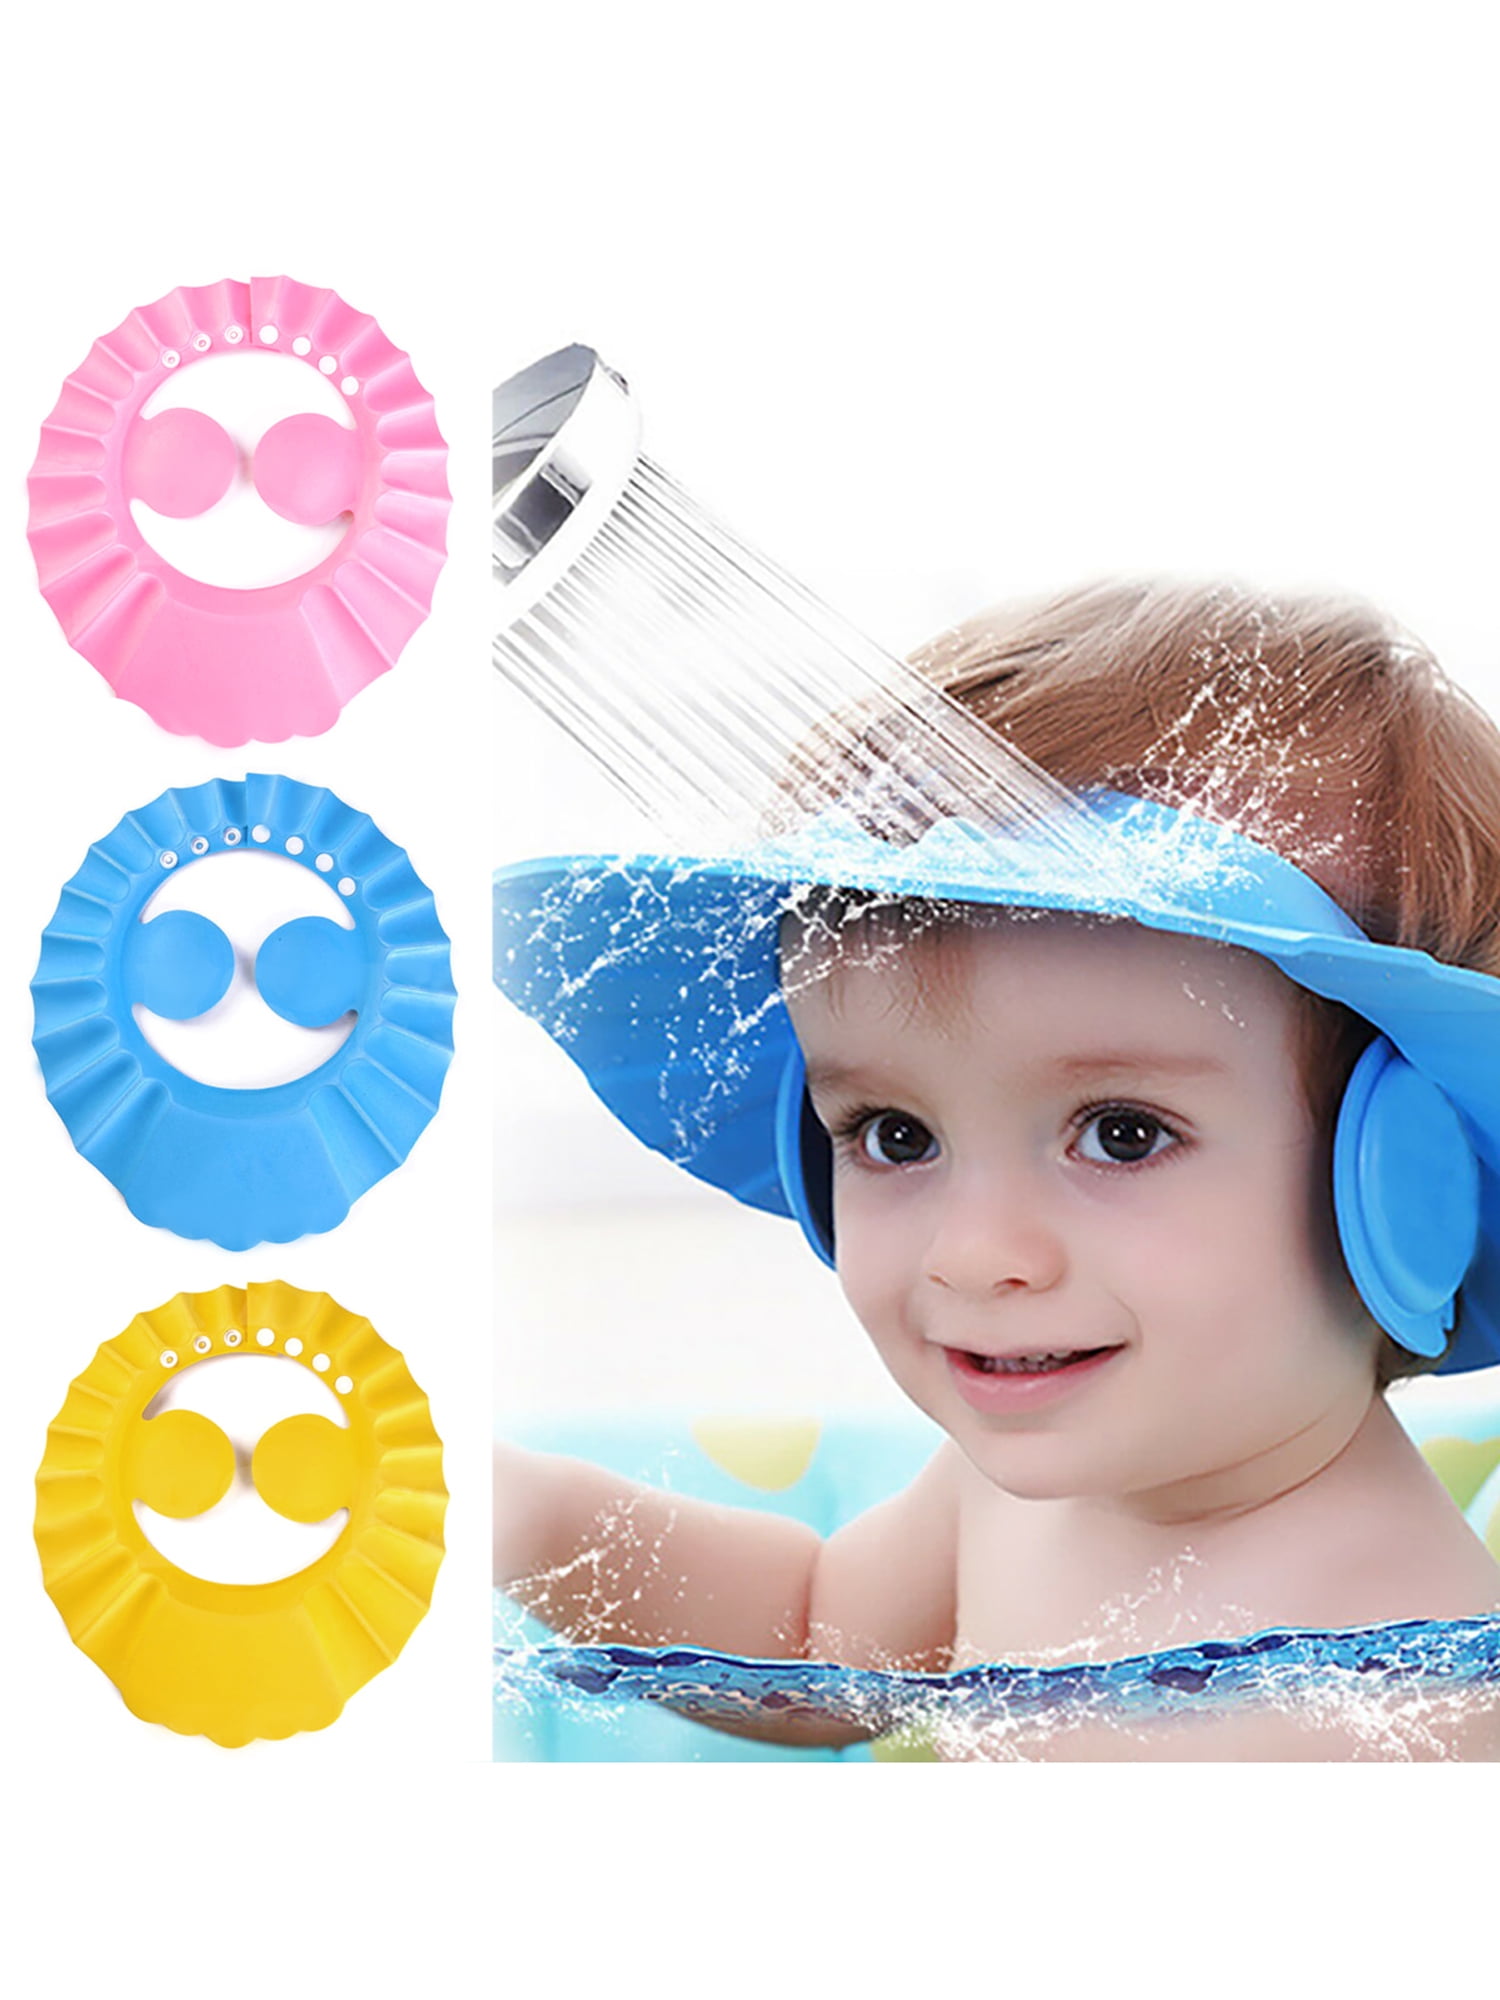 Bathroom Soft Shower Wash Hair Cover Head Cap Hat for Child Toddler Kids Bath TO